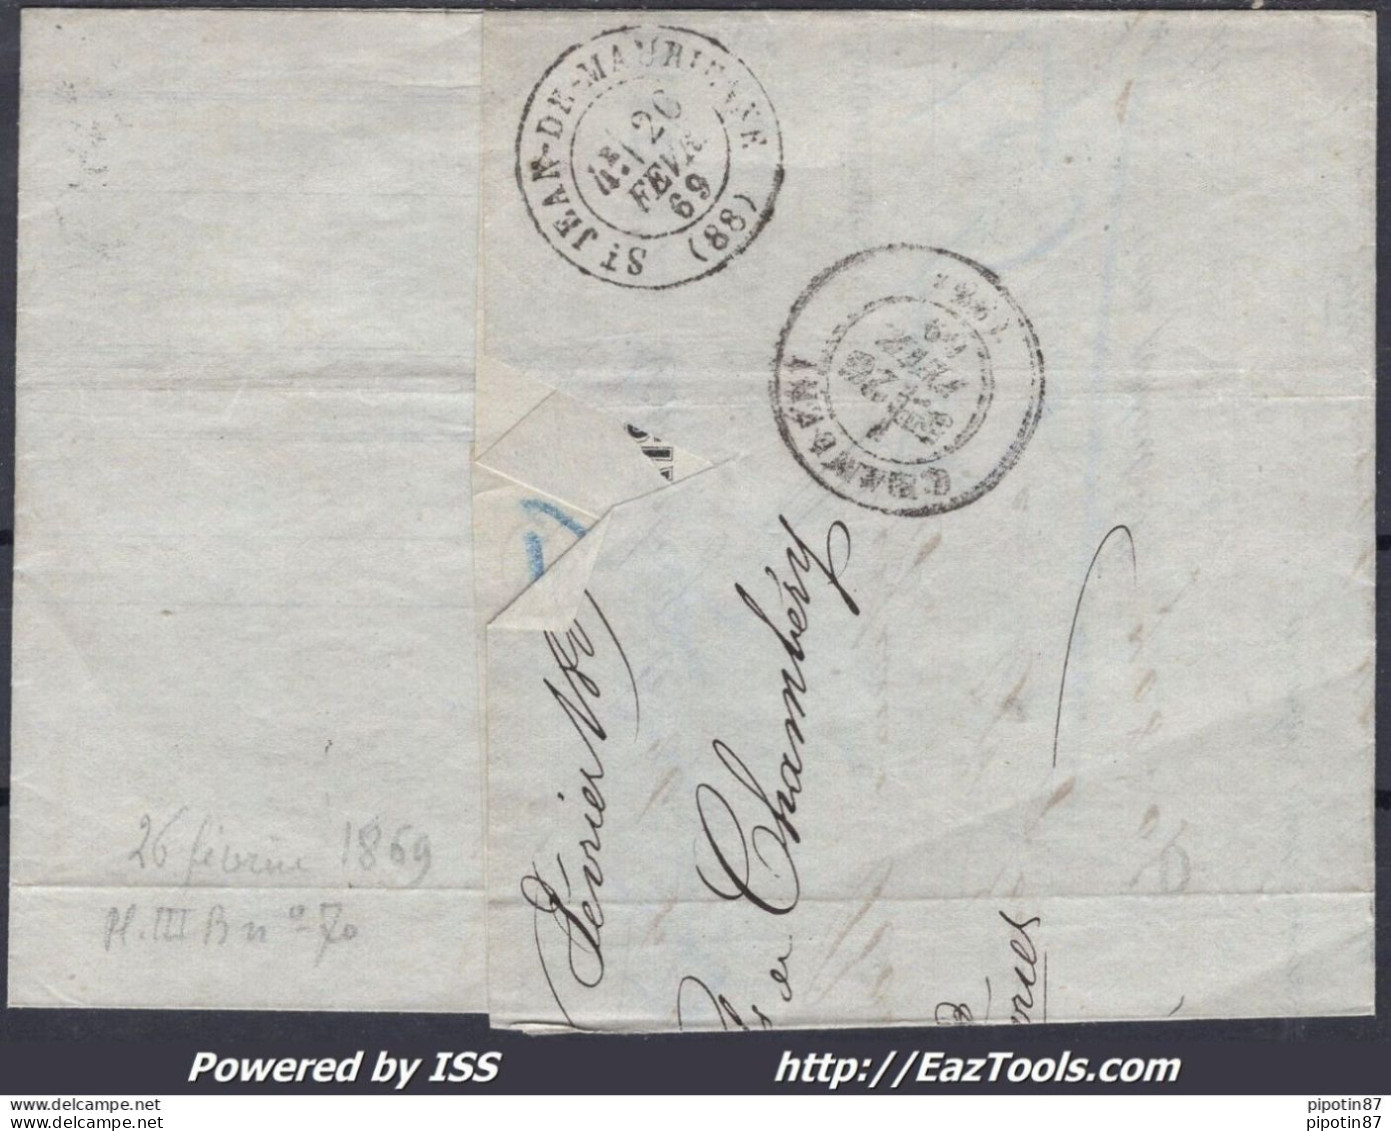 FRANCE N°29B SUR LETTRE GC 846 CHAMBERY + CAD GARE DE CHAMBERY DU 26/02/1869 - 1863-1870 Napoleon III With Laurels